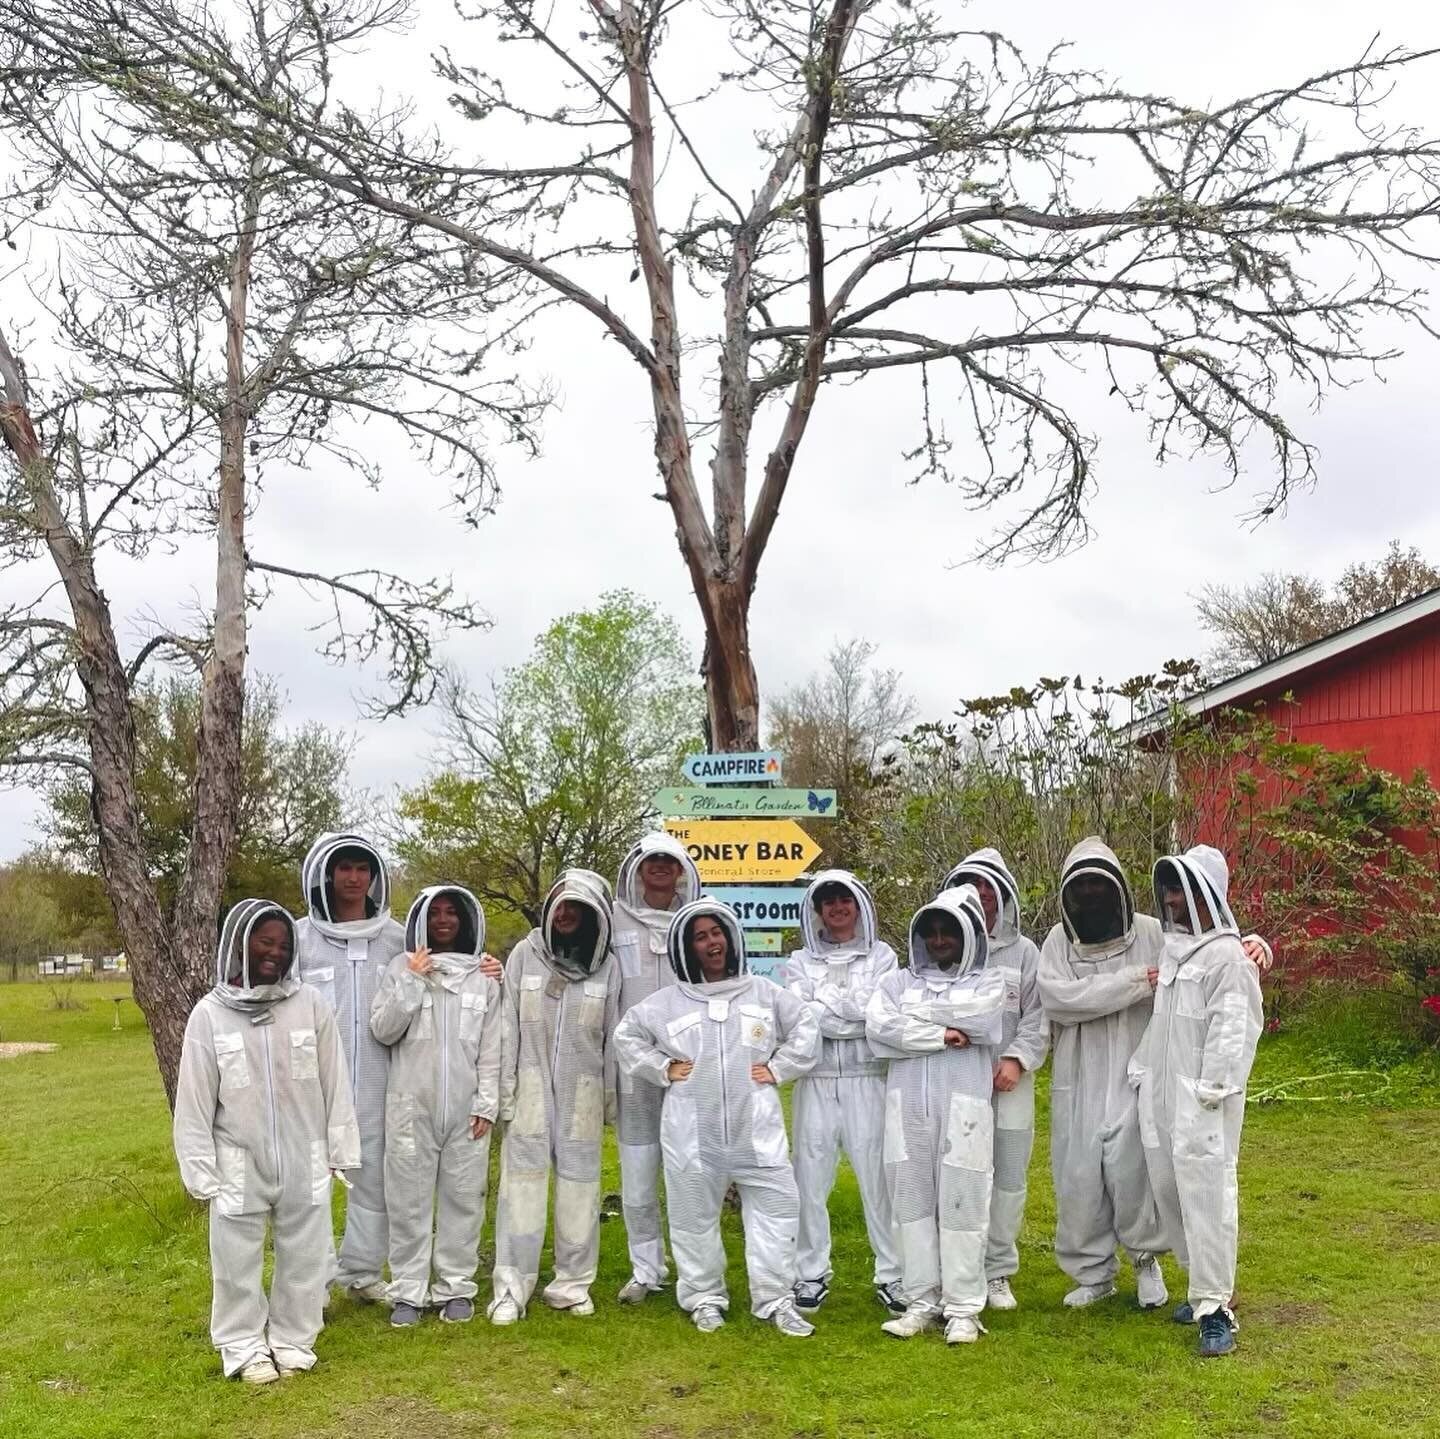 we had such a great time a few weeks ago @twohives! our members got to learn about the importance of bees, beekeeping practices, honey tasting, and so much more! thank you to @twohives for having us 🐝